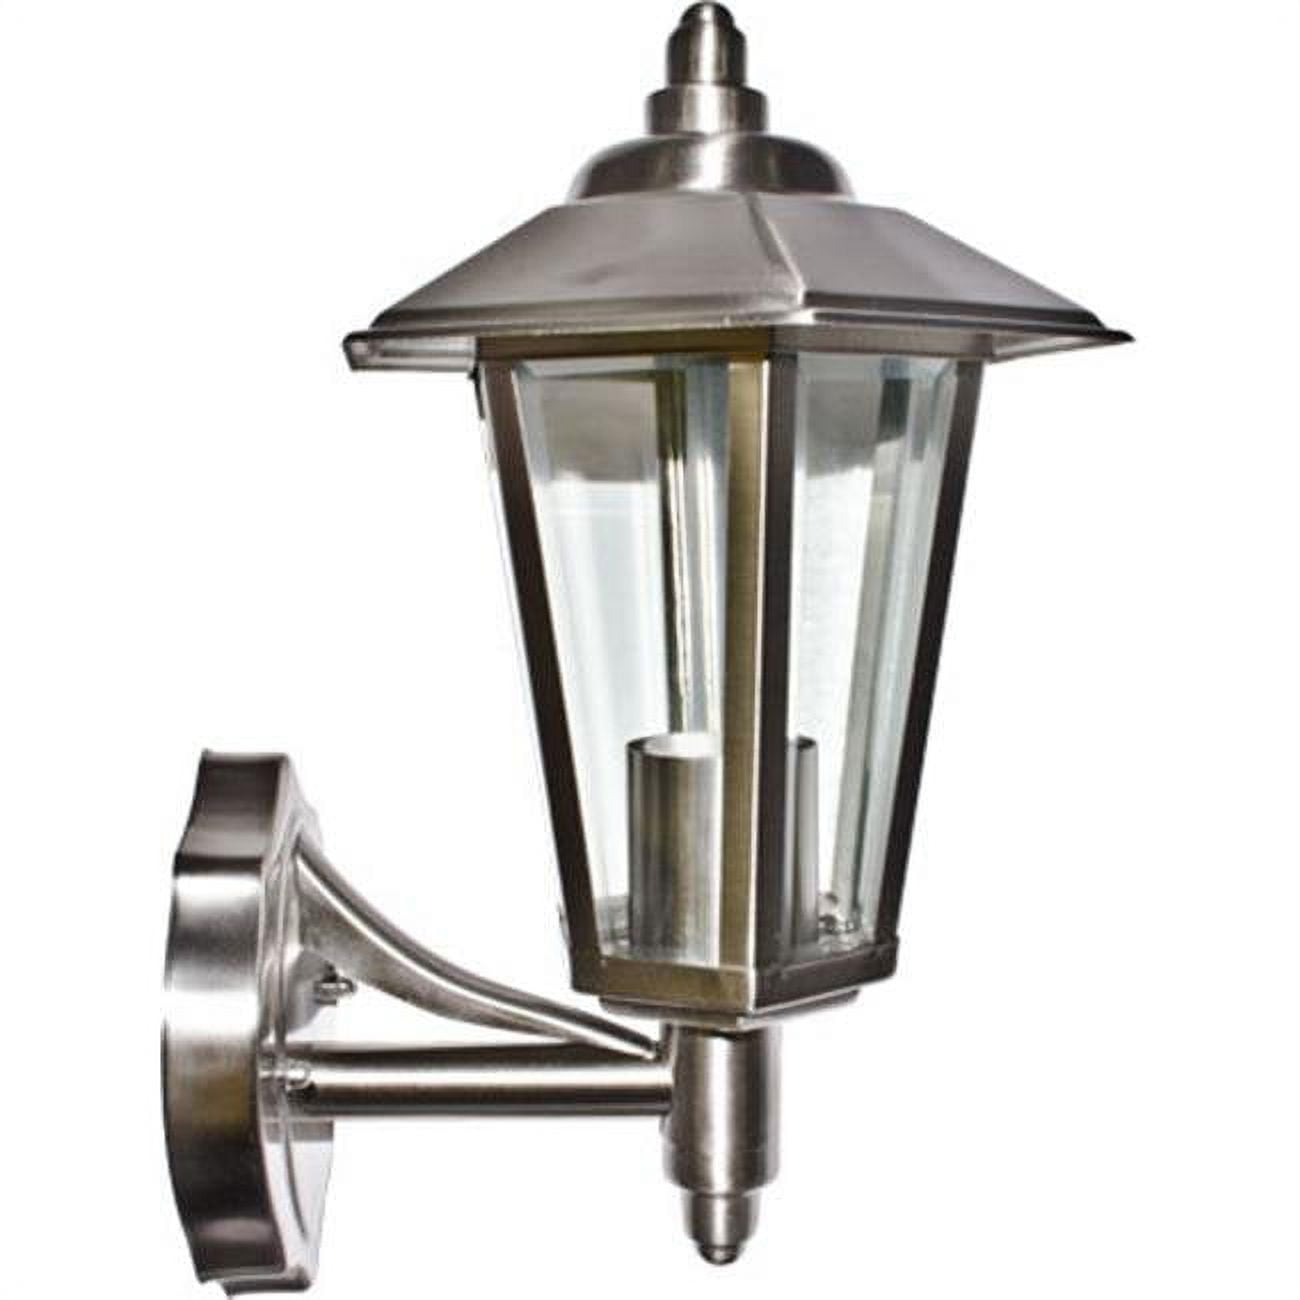 Picture of Dabmar Lighting GM120-SS Stainless Steel Incandescent Wall Mount Fixture - 120V, Stainless Steel - 12.63 x 6.75 x 8 in.